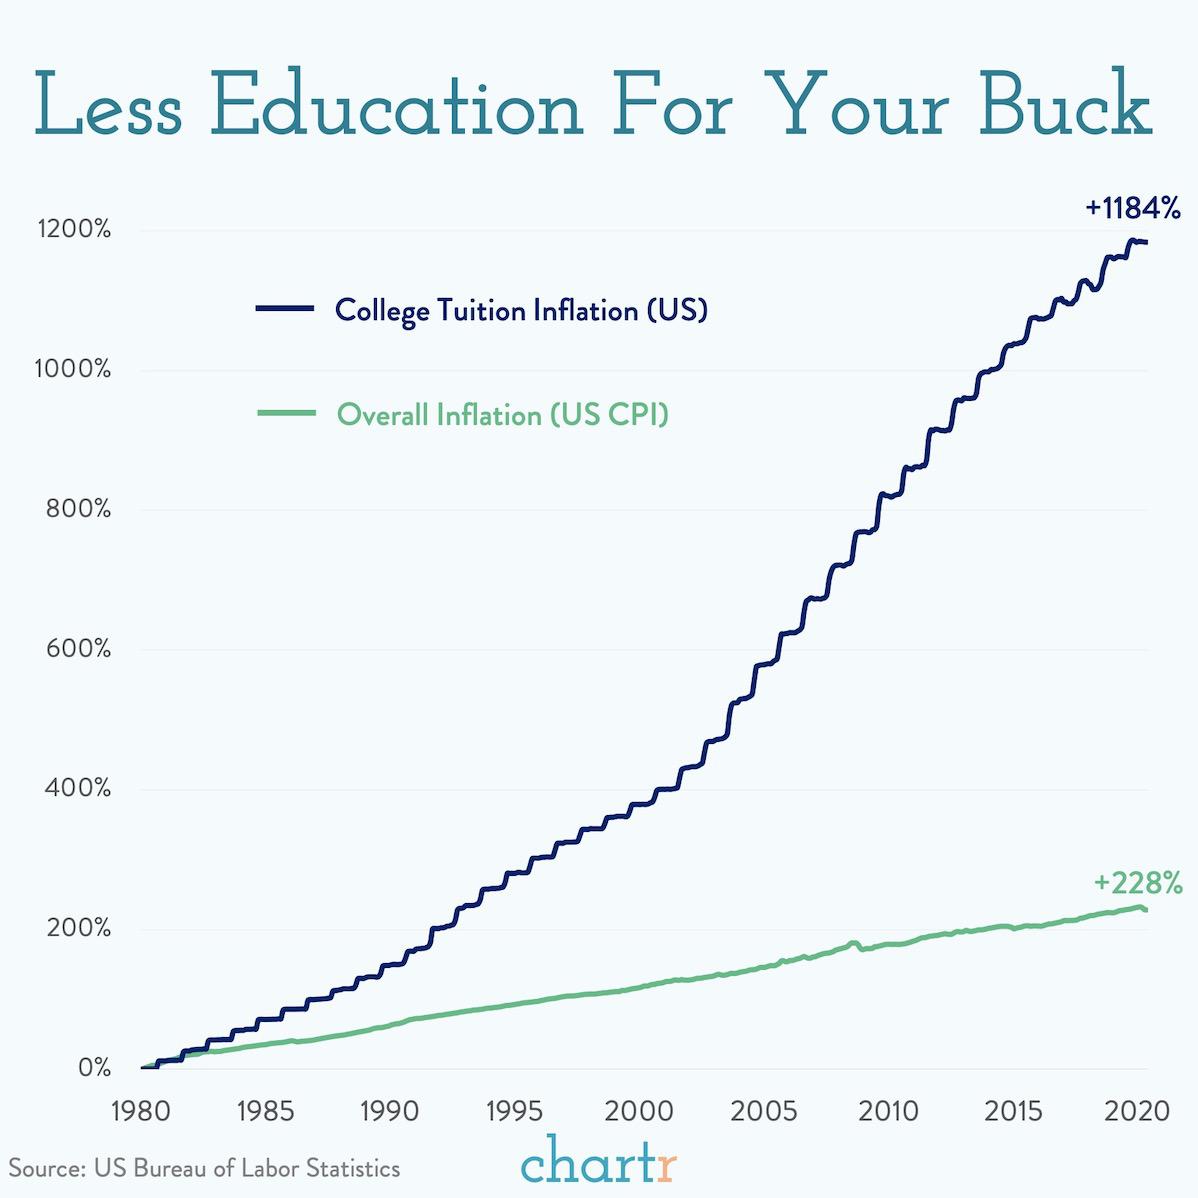 6. Government guaranteed loan programs have caused college costs to skyrocket. Loan cancelation will only make this worse.